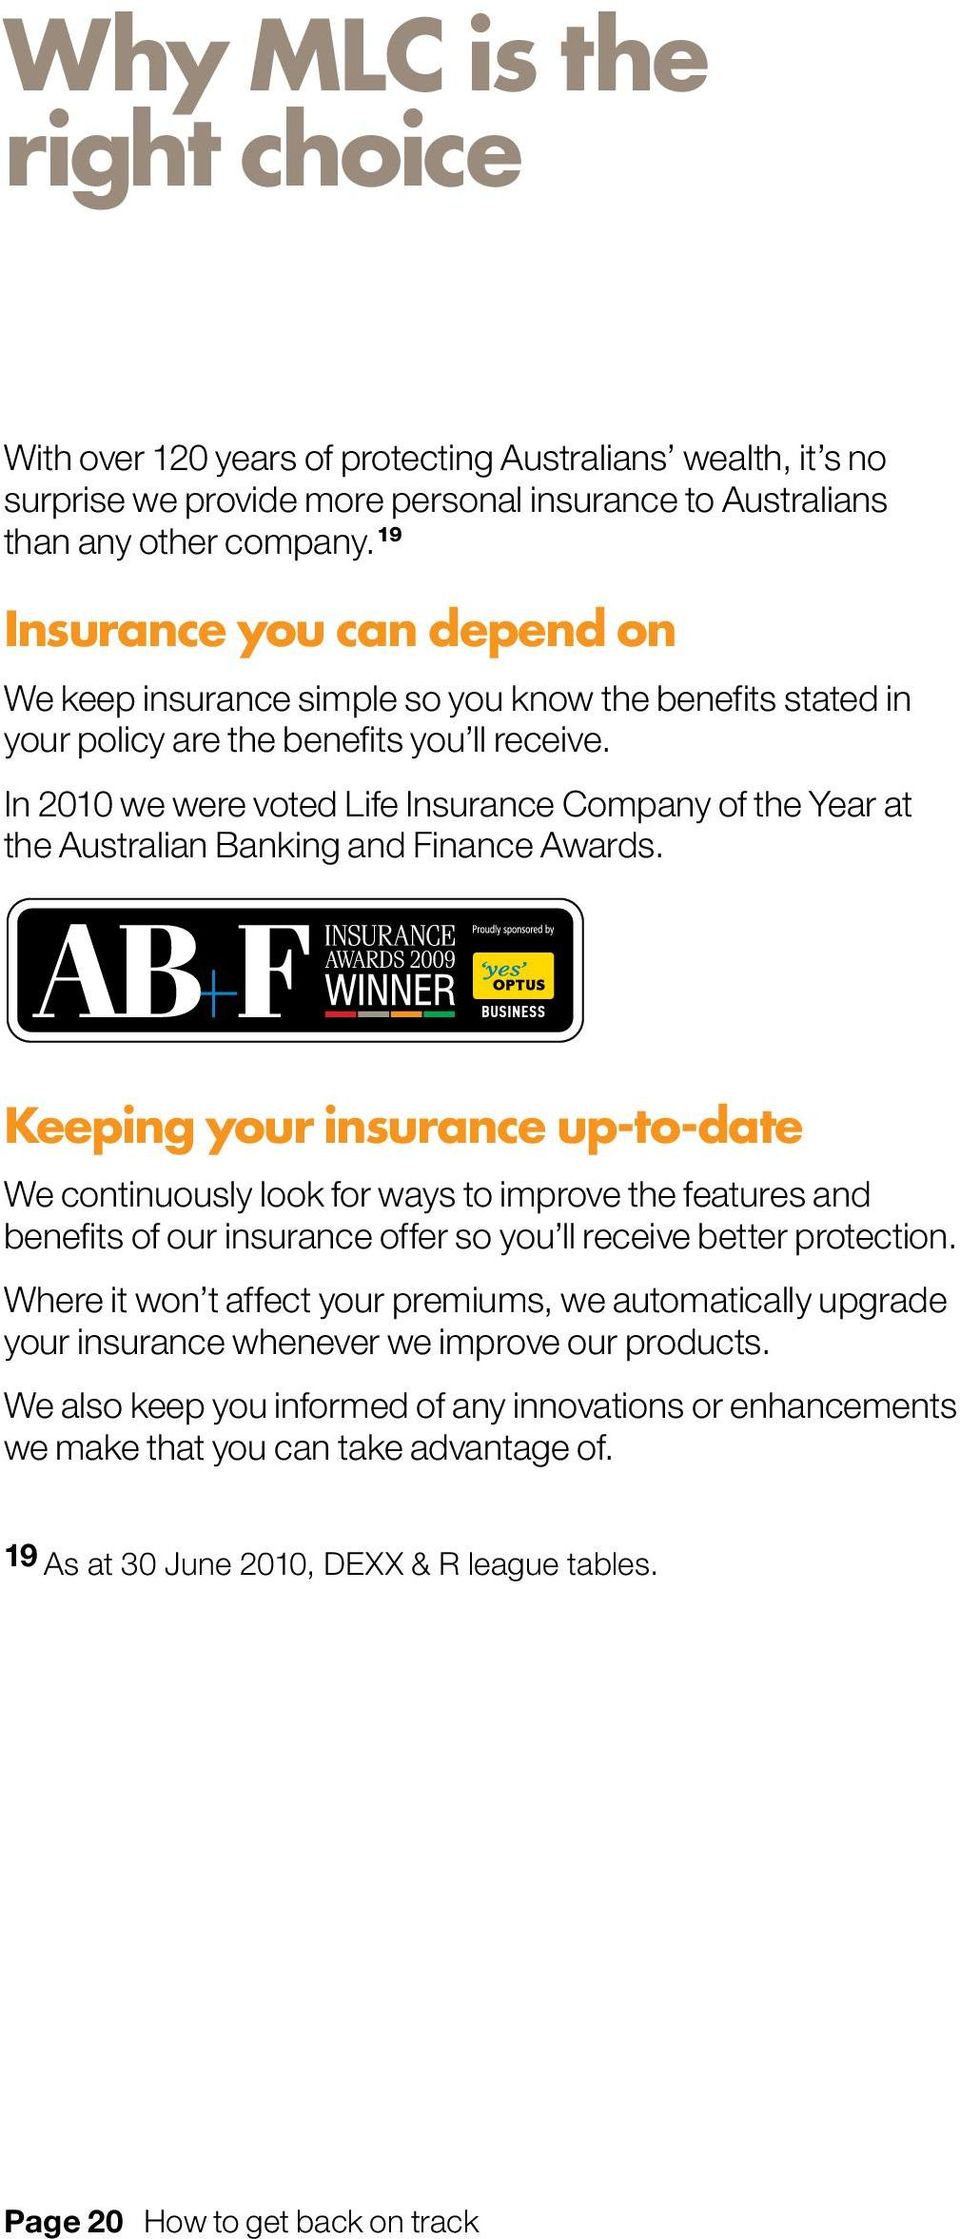 In 2010 we were voted Life Insurance Company of the Year at the Australian Banking and Finance Awards.